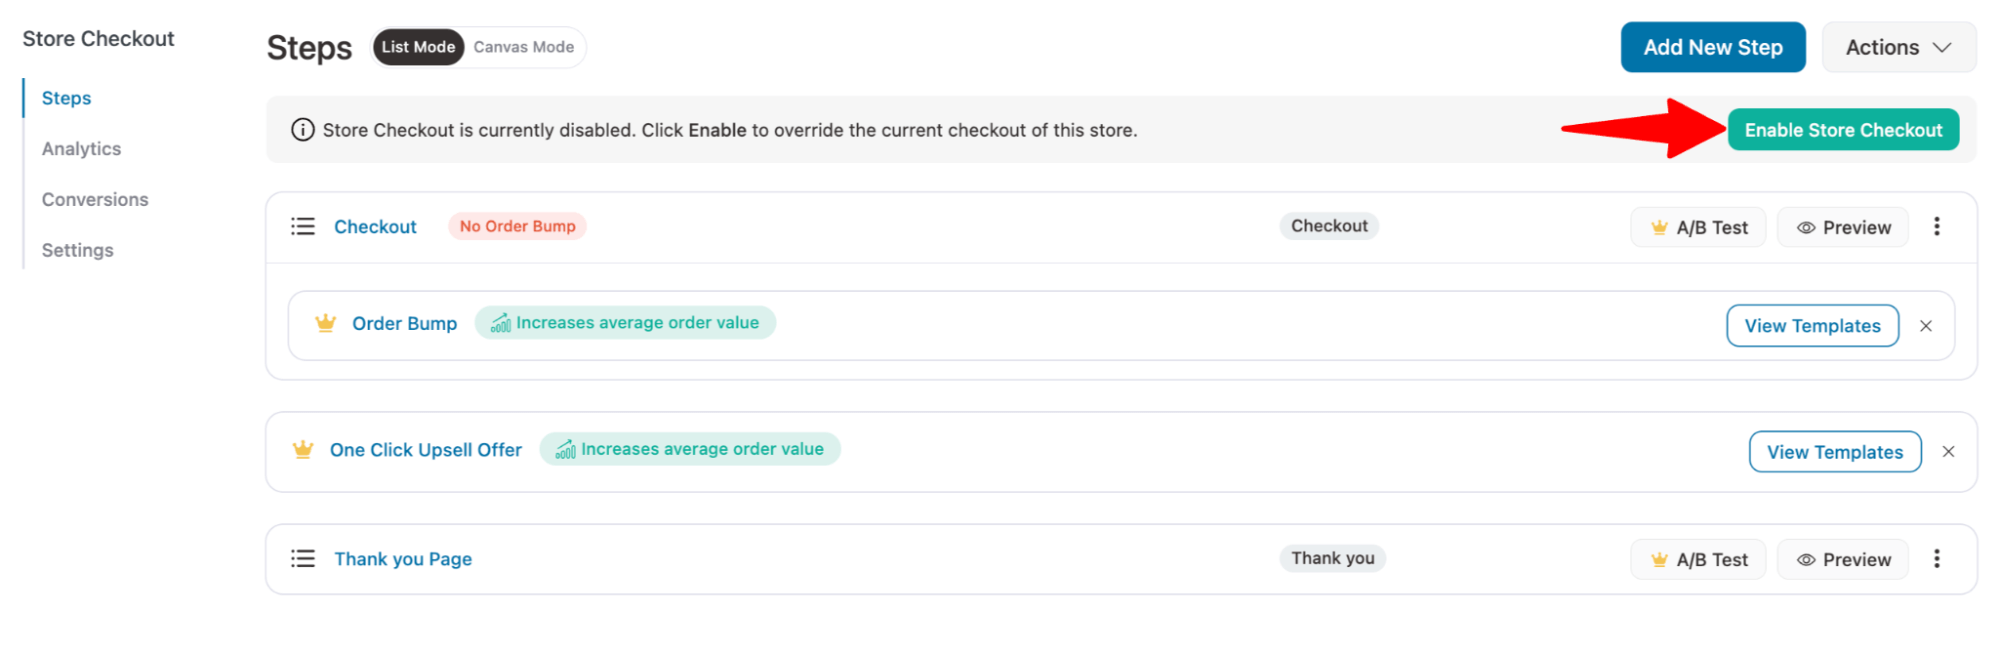 enable store checkout to allow checkout coupon autoapply